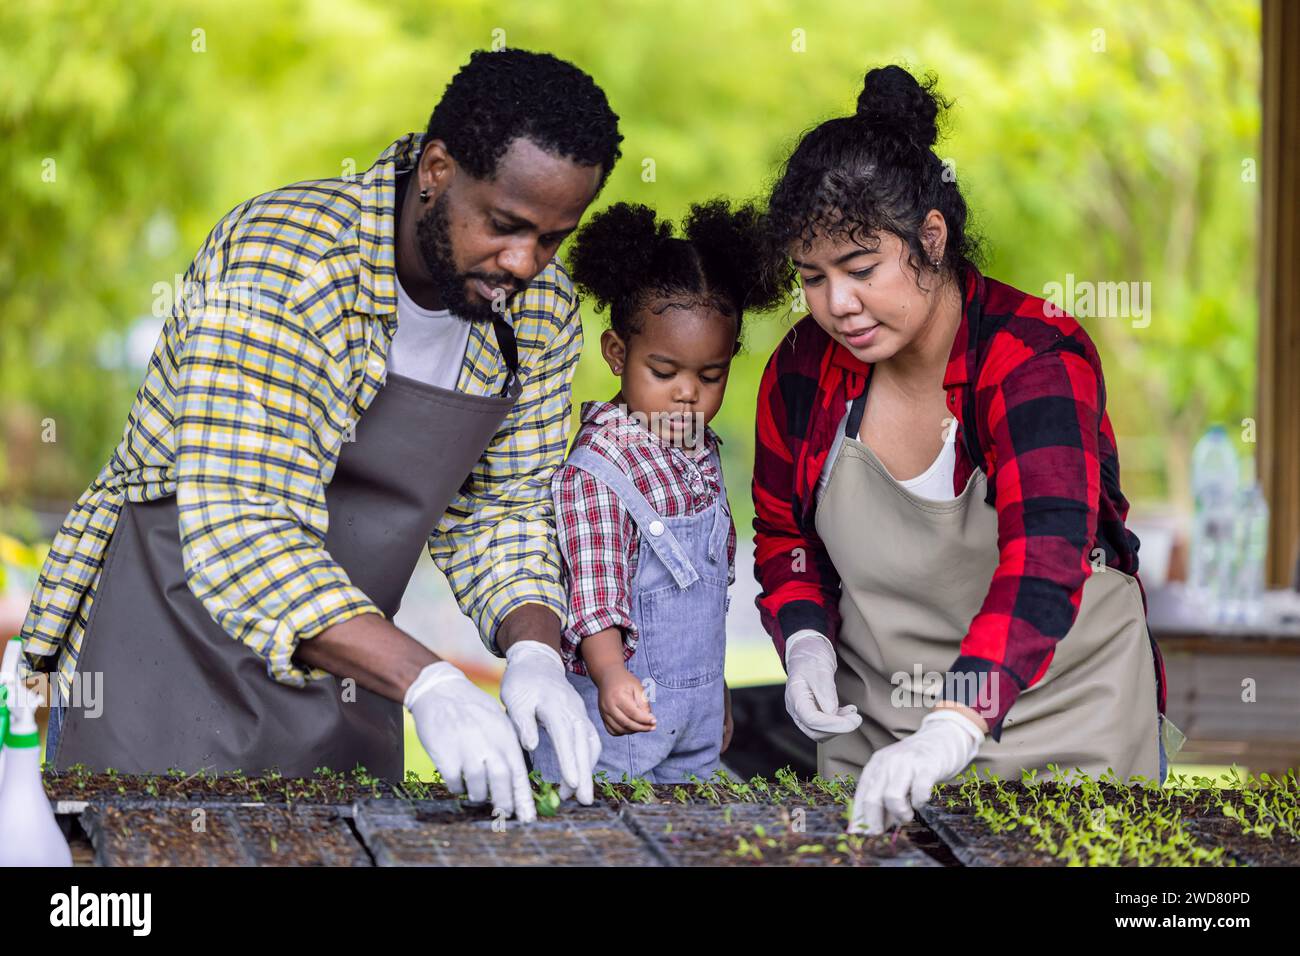 African black child play plant little tree gardening in agriculture farm with family. Children dad mom love nature oganic farming. Stock Photo